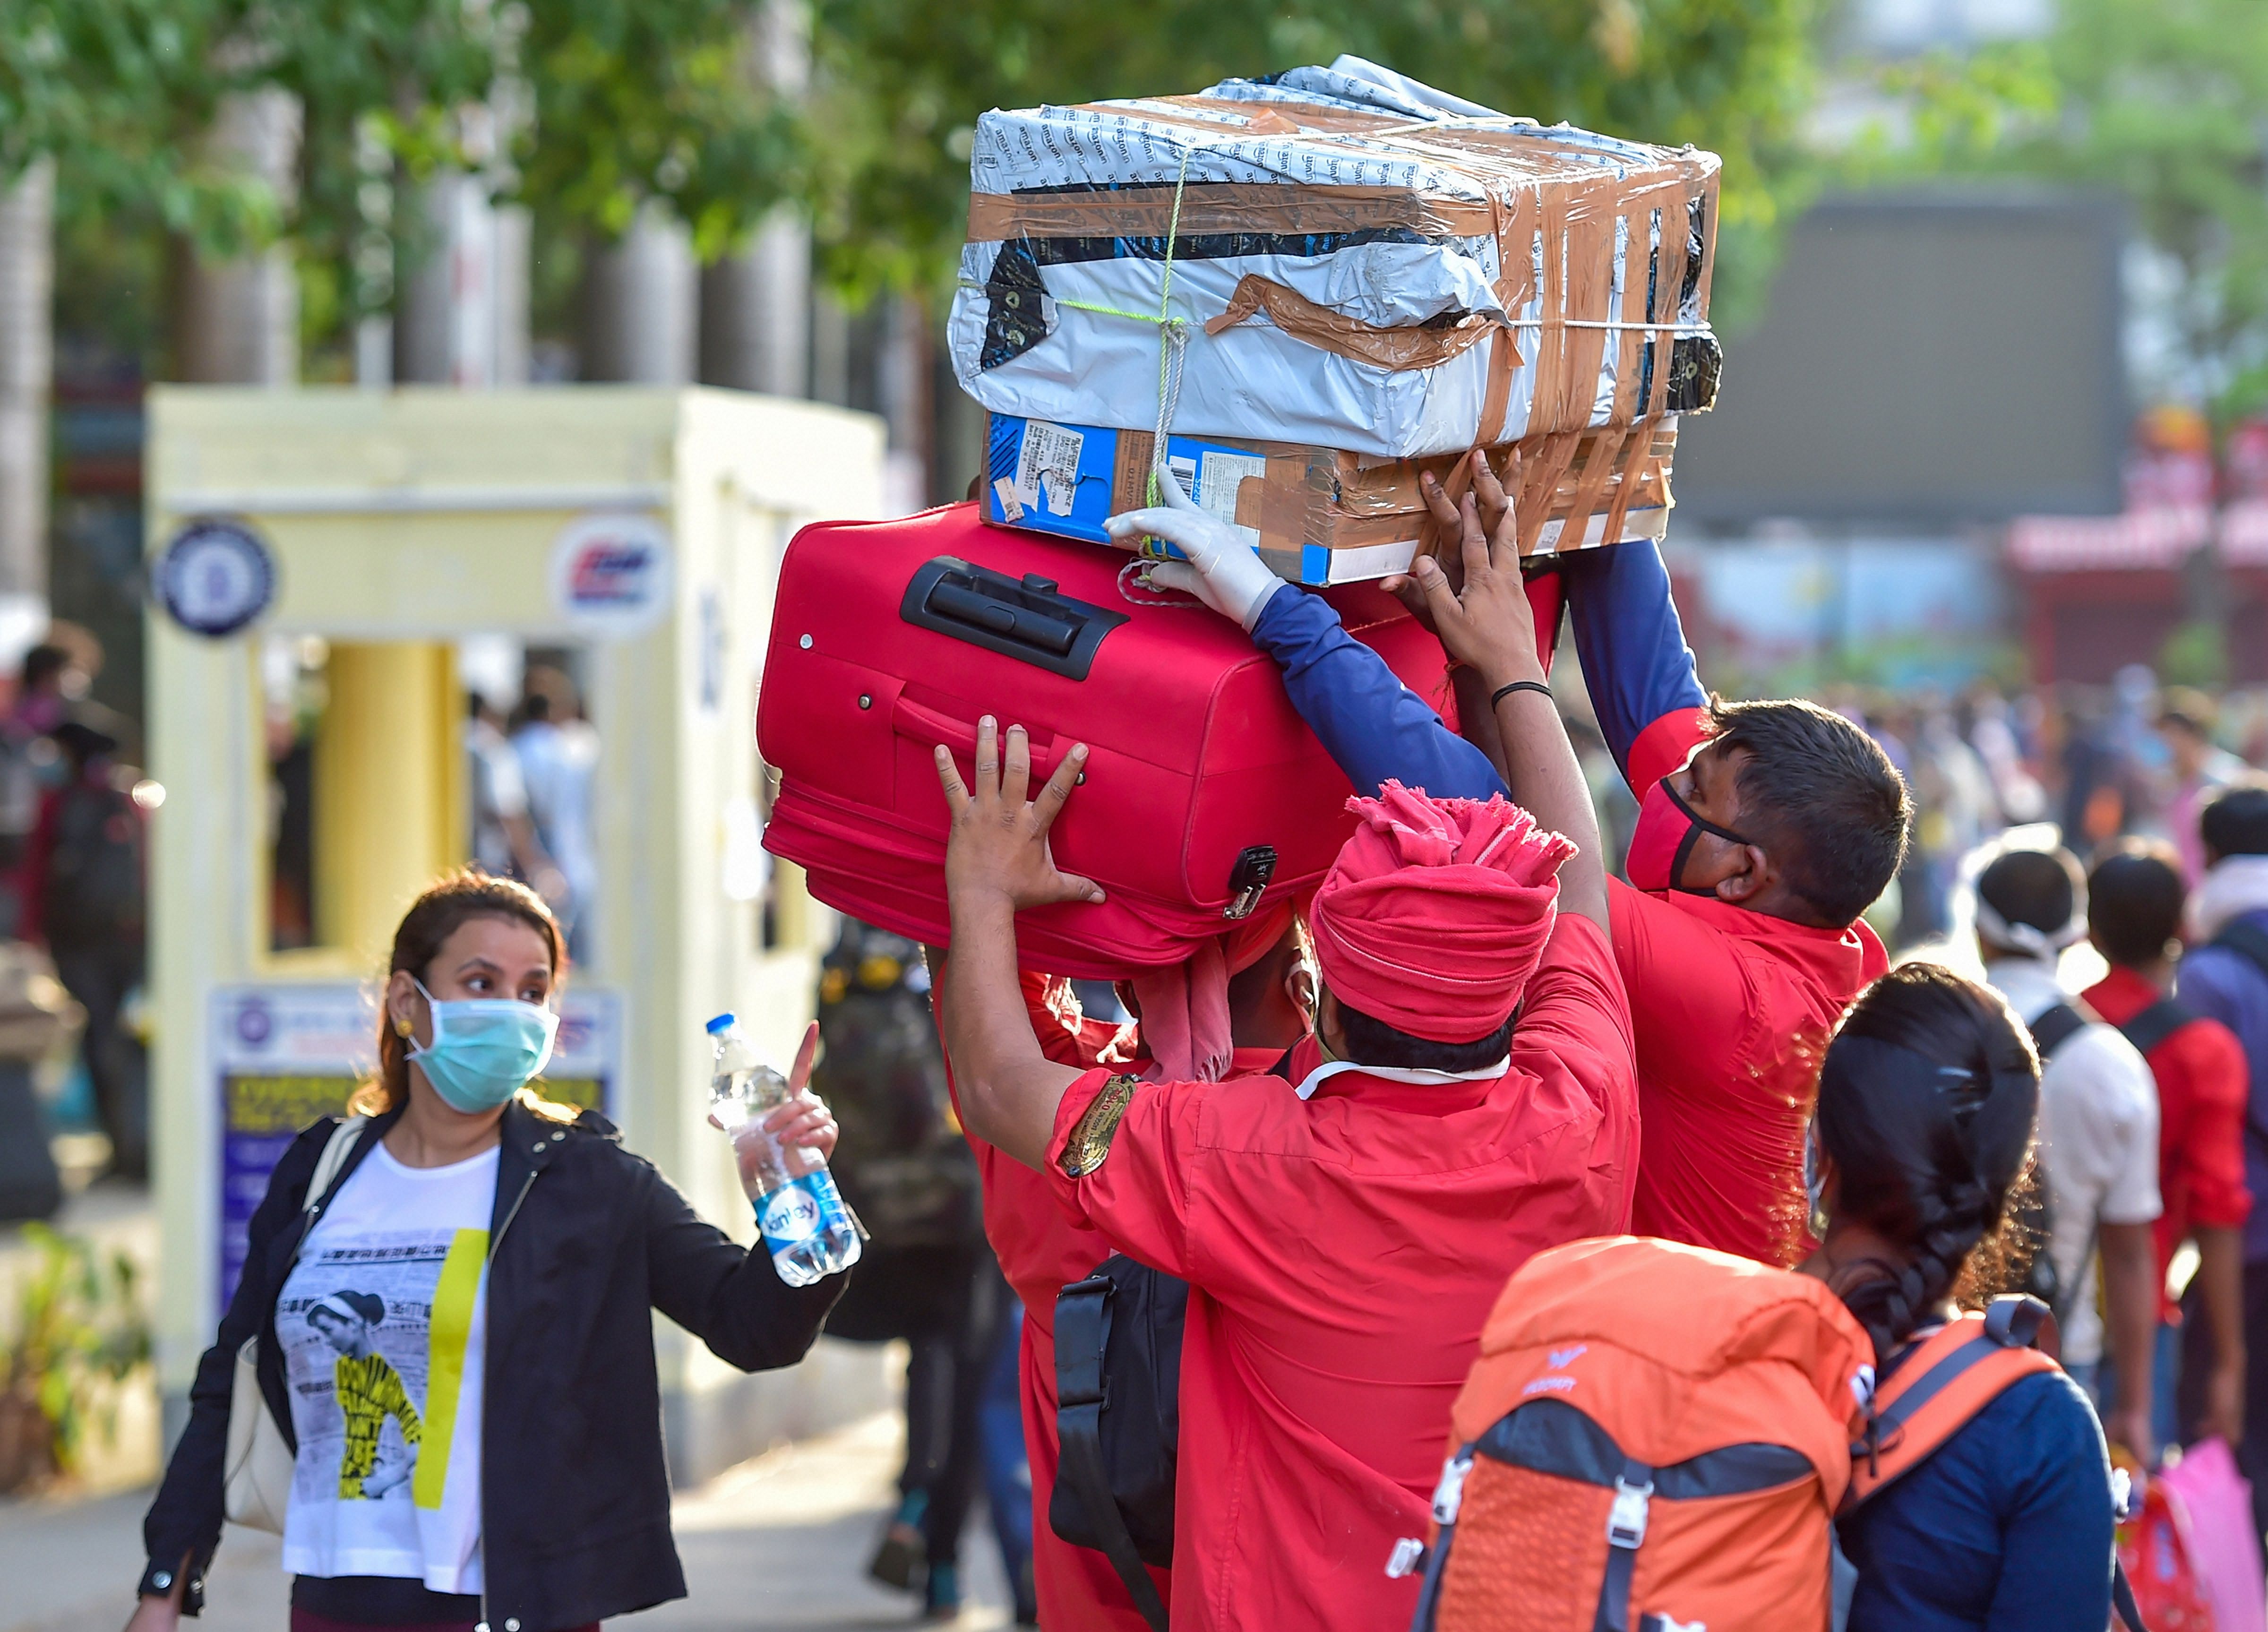 Railway porters (coolie) carry luggage of passengers arriving at a railway station to board the special train to New Delhi after the resumption of passenger train services by the Indian Railways in a graded manner amid ongoing COVID-19 lockdown, in Bengaluru. (PTI Photo)